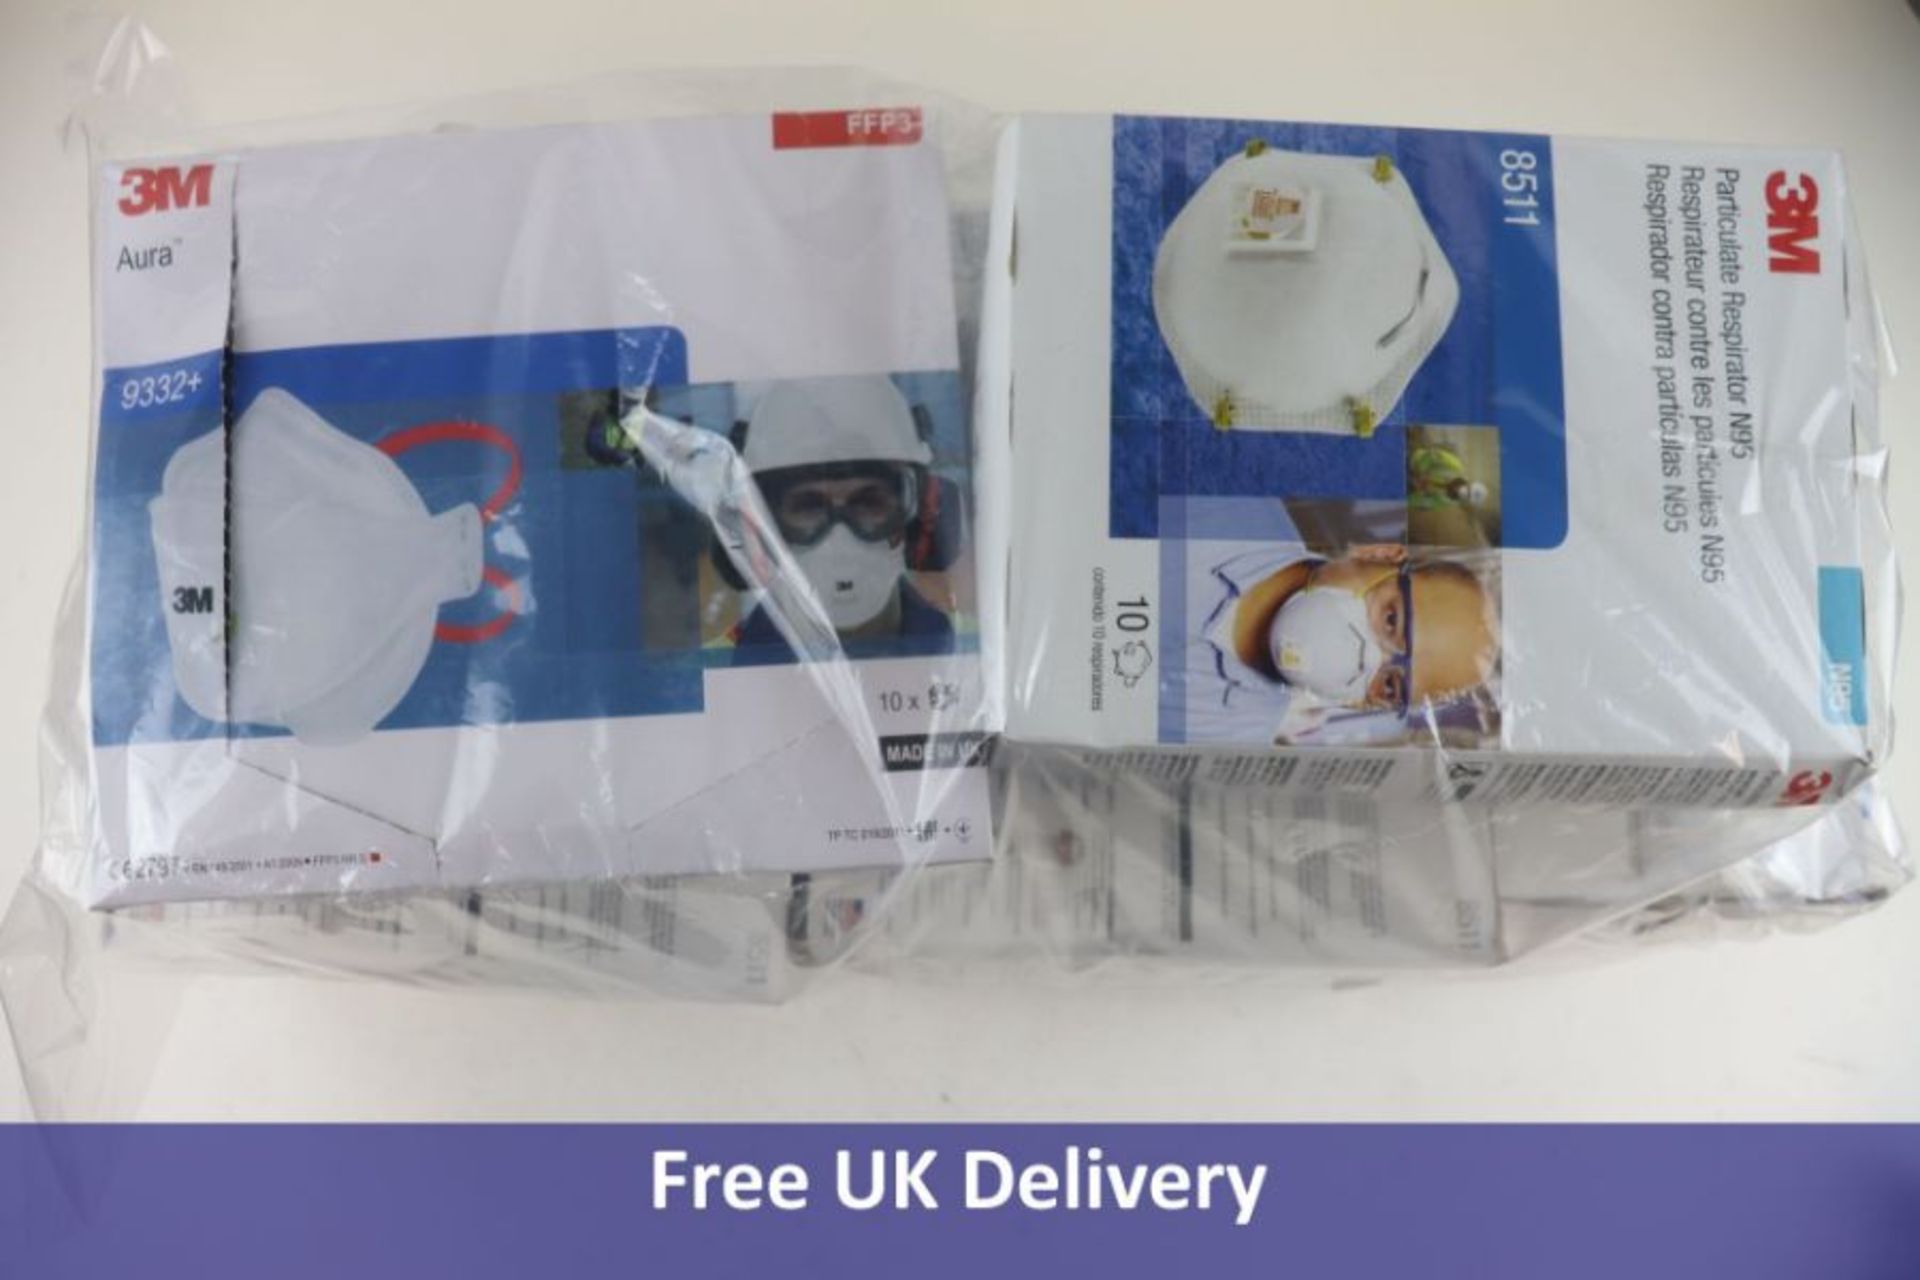 Seven Boxes of 10 3M Disposable Masks, to Include 6x N95 8511 and 1x Aura FFP3 9332+